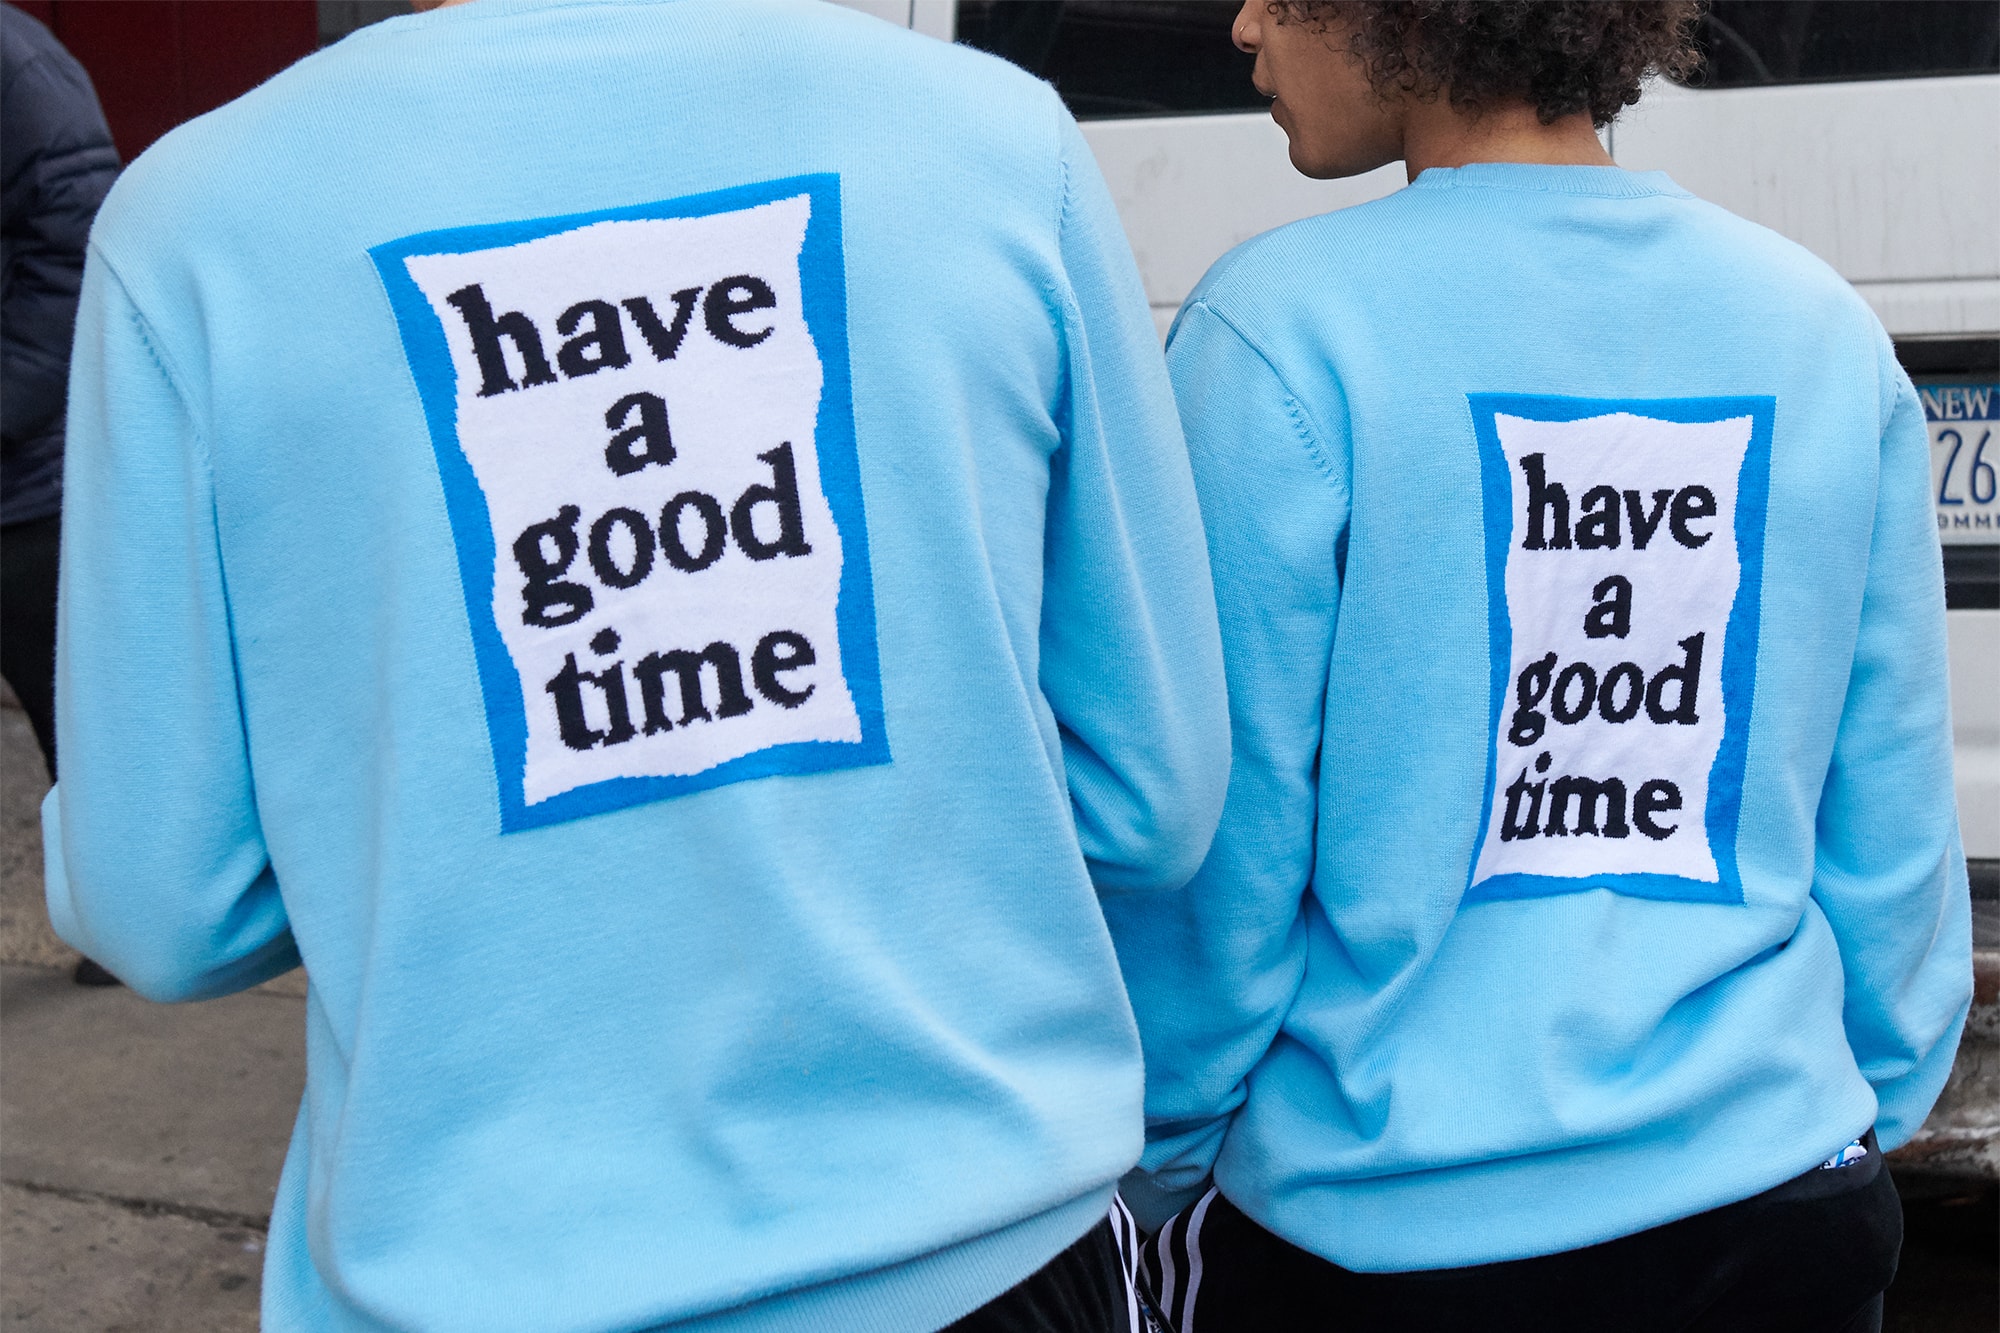 adidas Originals by have a good time 全新聯名系列正式發佈